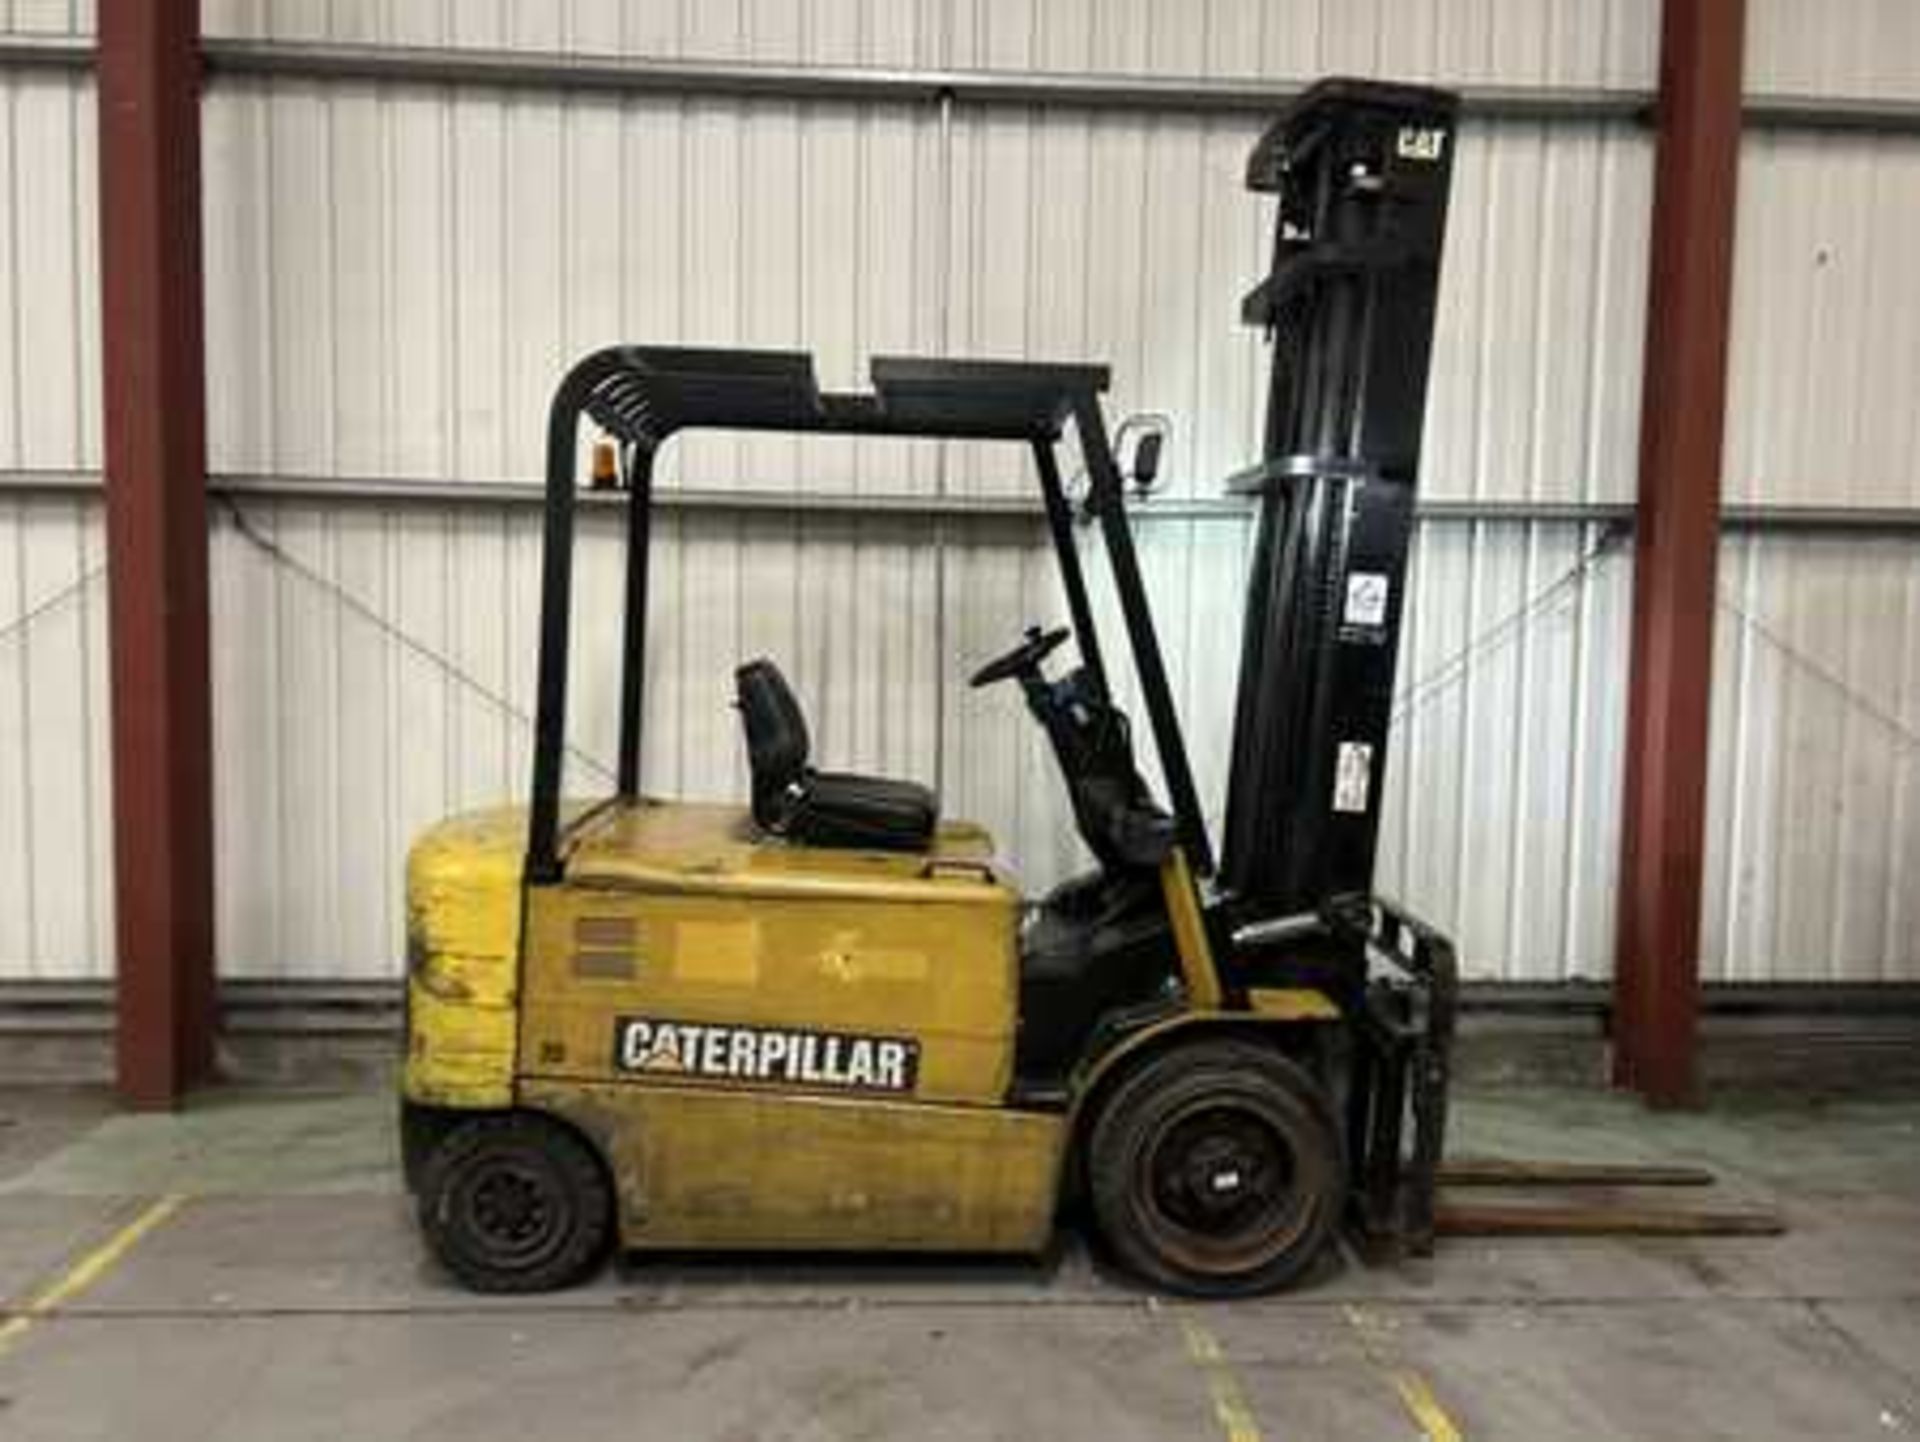 CAT ELECTRIC FORKLIFT - EP35K-PAC, 2014 - Image 5 of 6